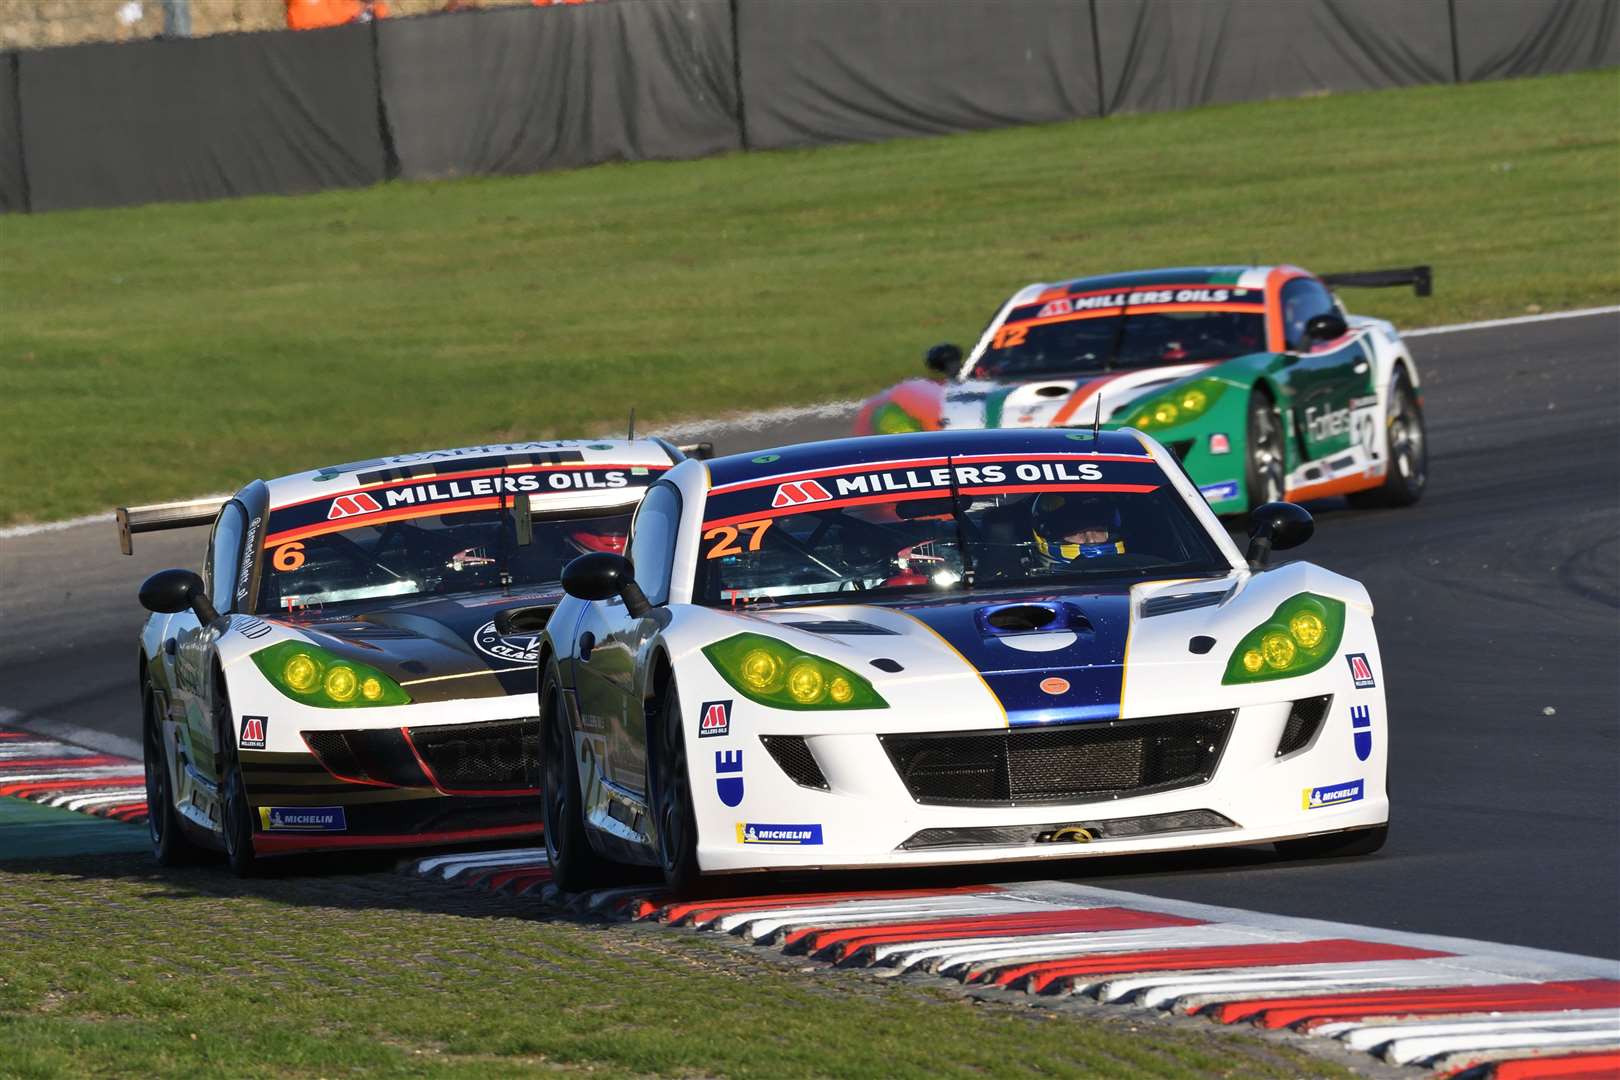 Emson withstood pressure from champion James Kellett in the Ginetta GT4 Supercup